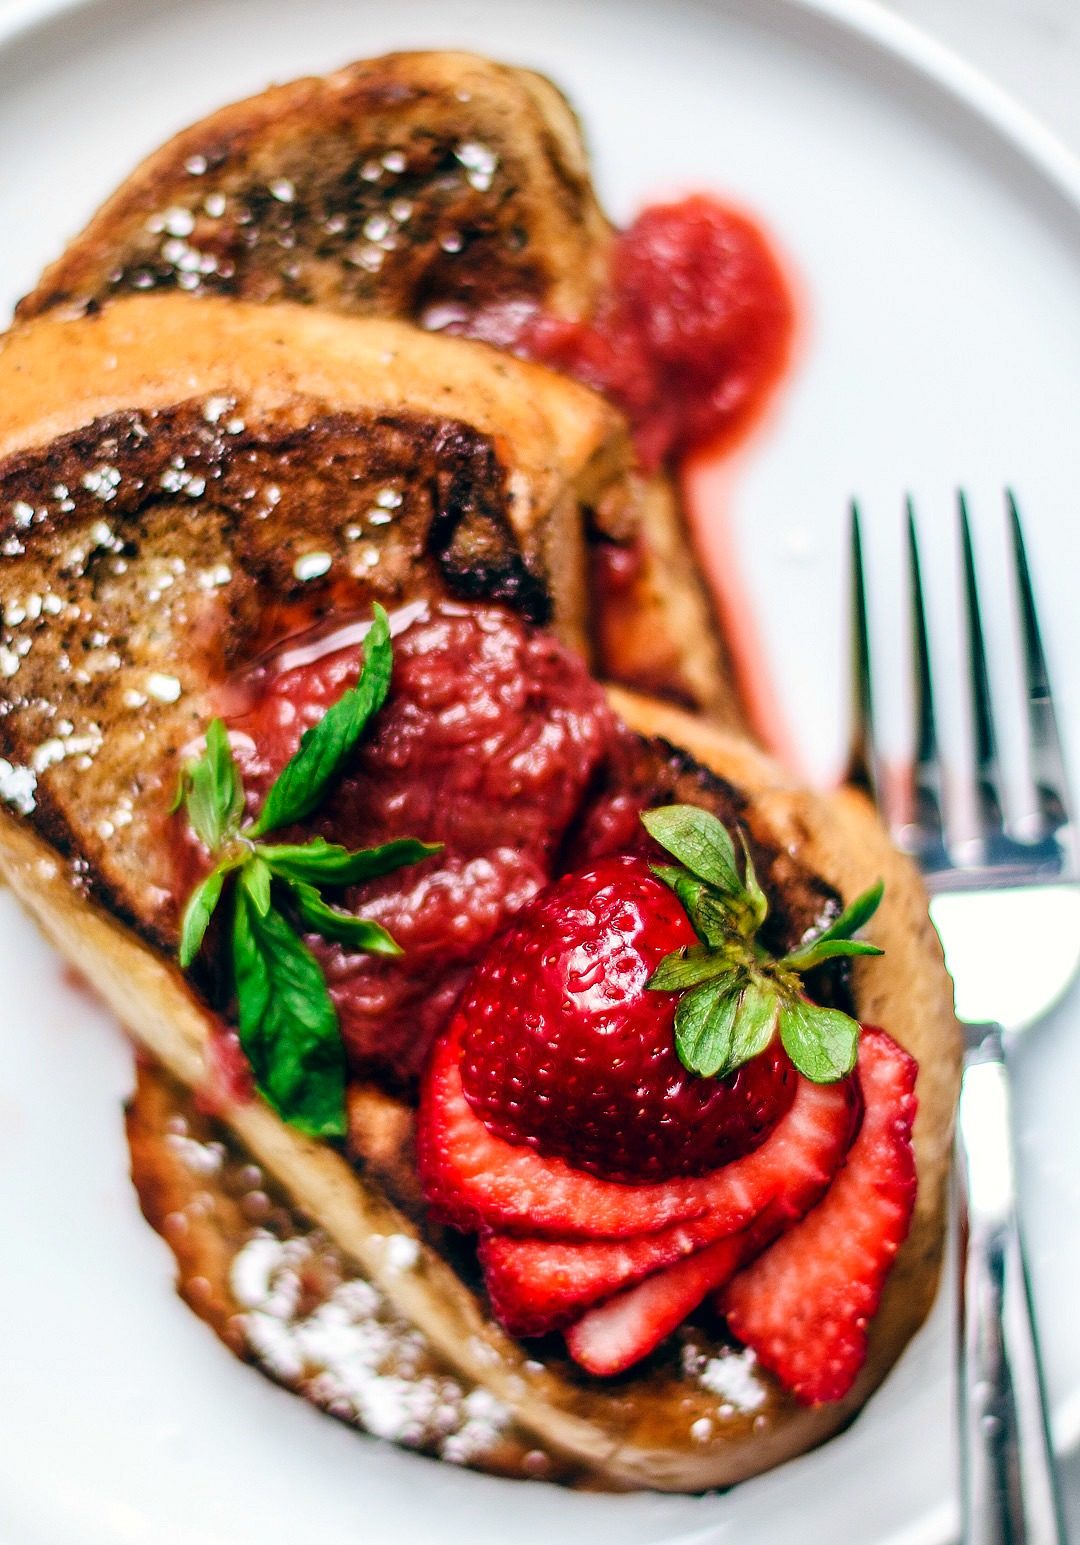 Close up of fresh strawberries fanned over French toast.